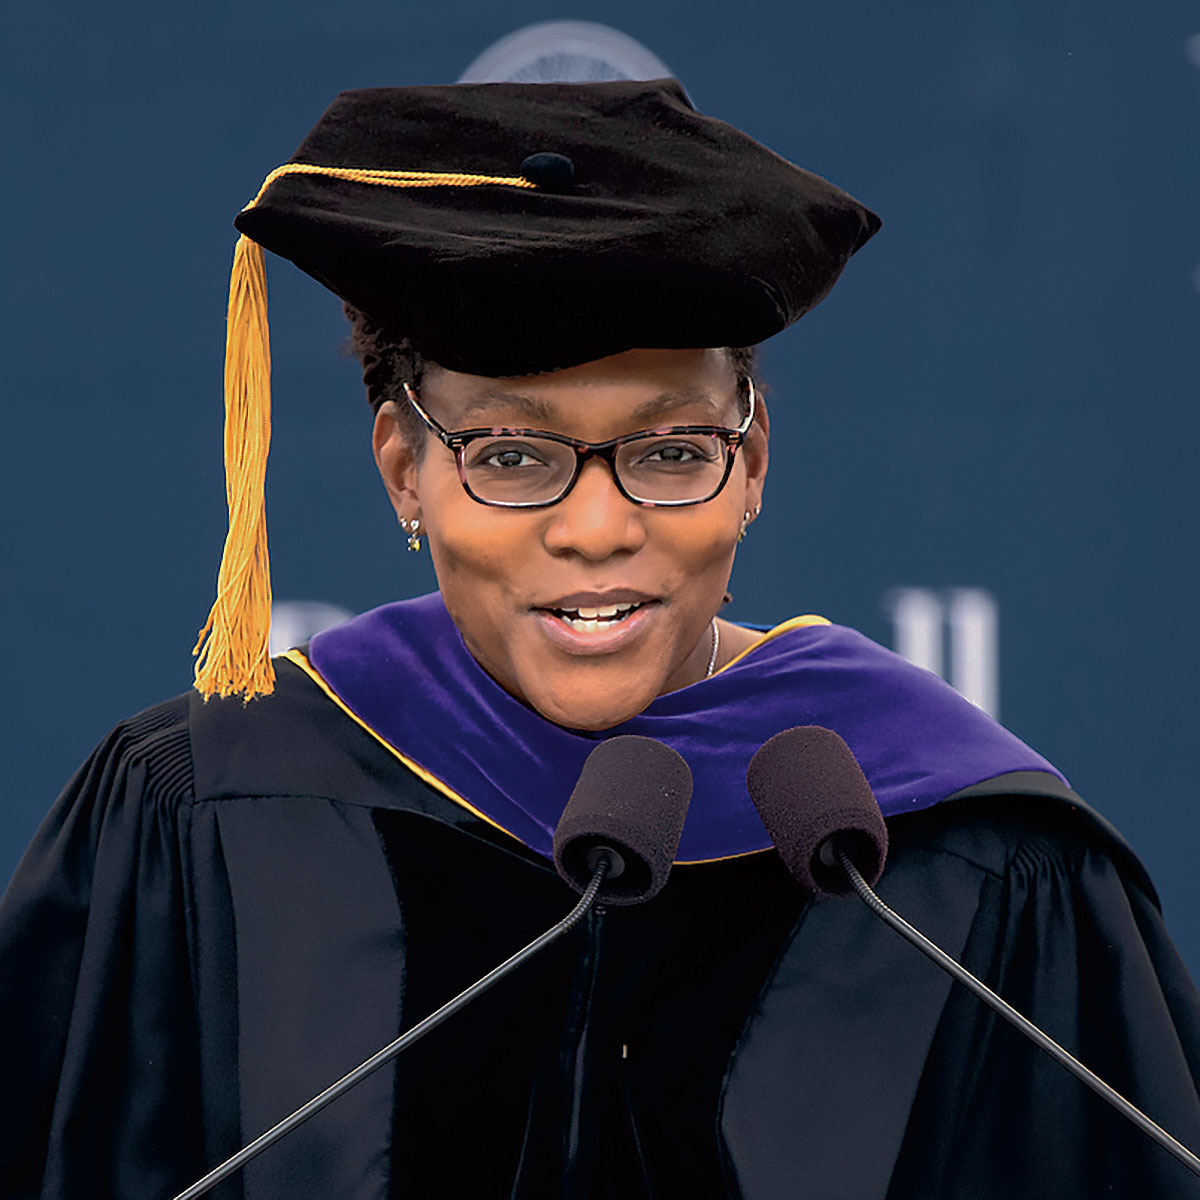 Audra Wilson ’94 in a teacher's graduation cap and gown giving her keynote address at Bucknell’s 171st Commencement